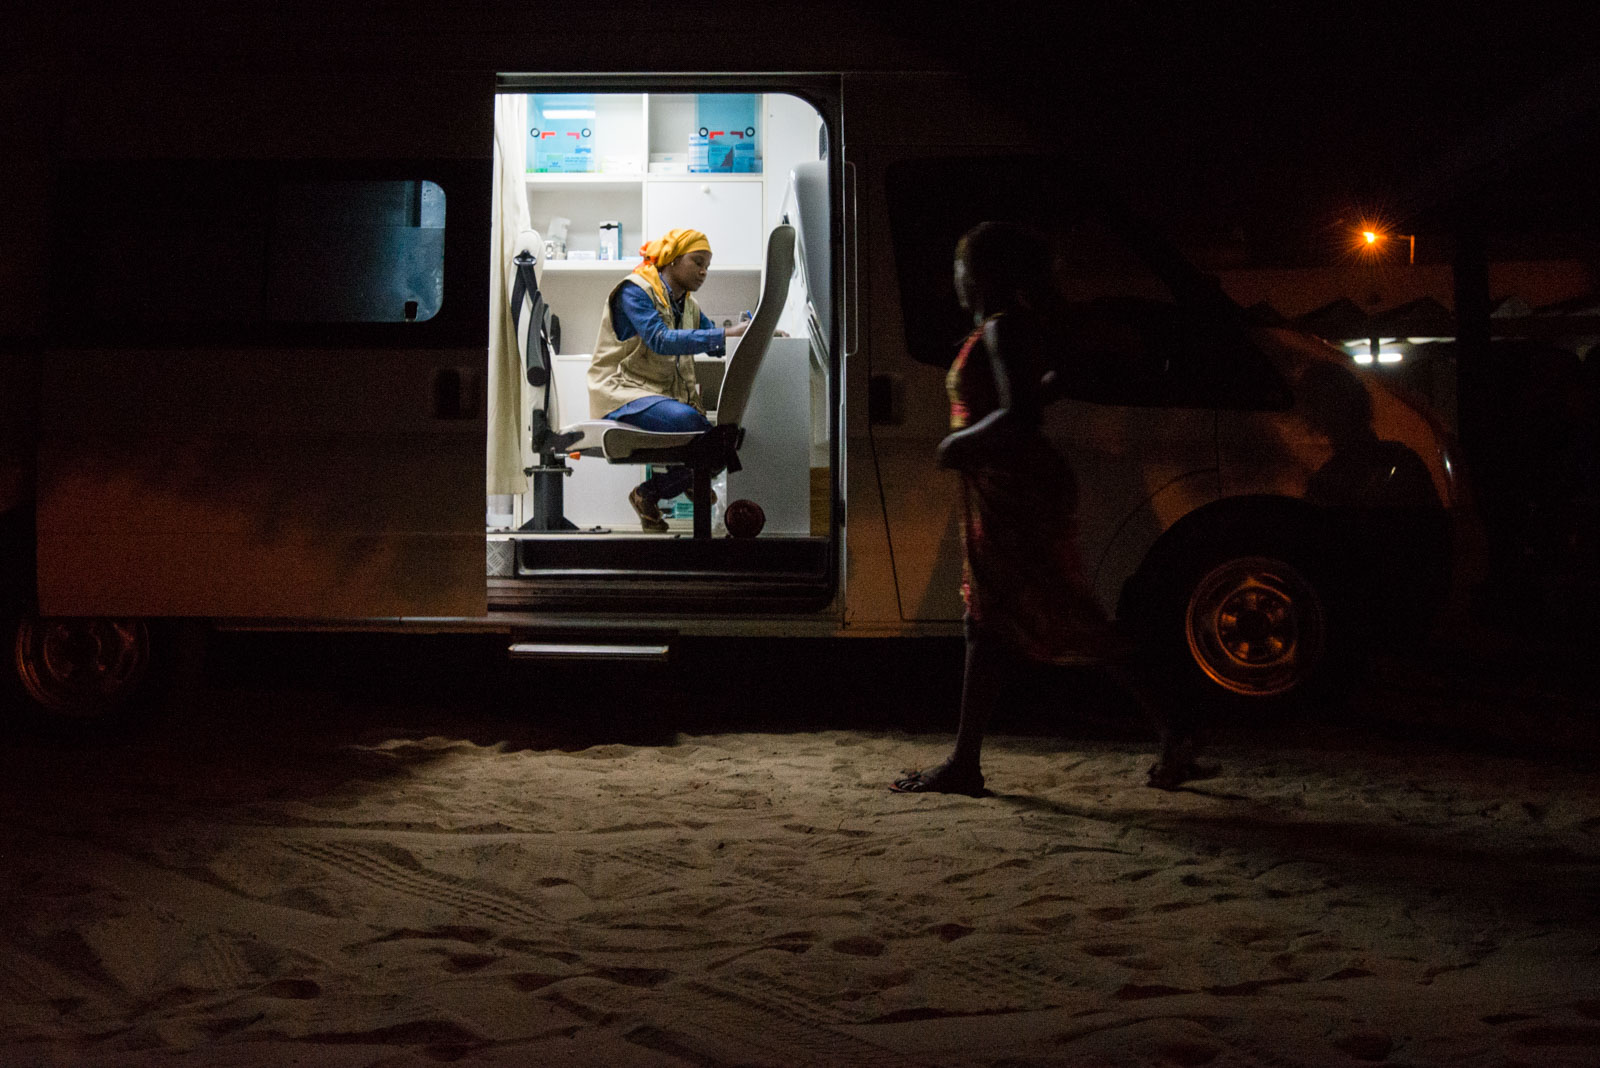 A clandestine sex worker approaches the Enda Santé mobile clinic for a check-up with a doctor